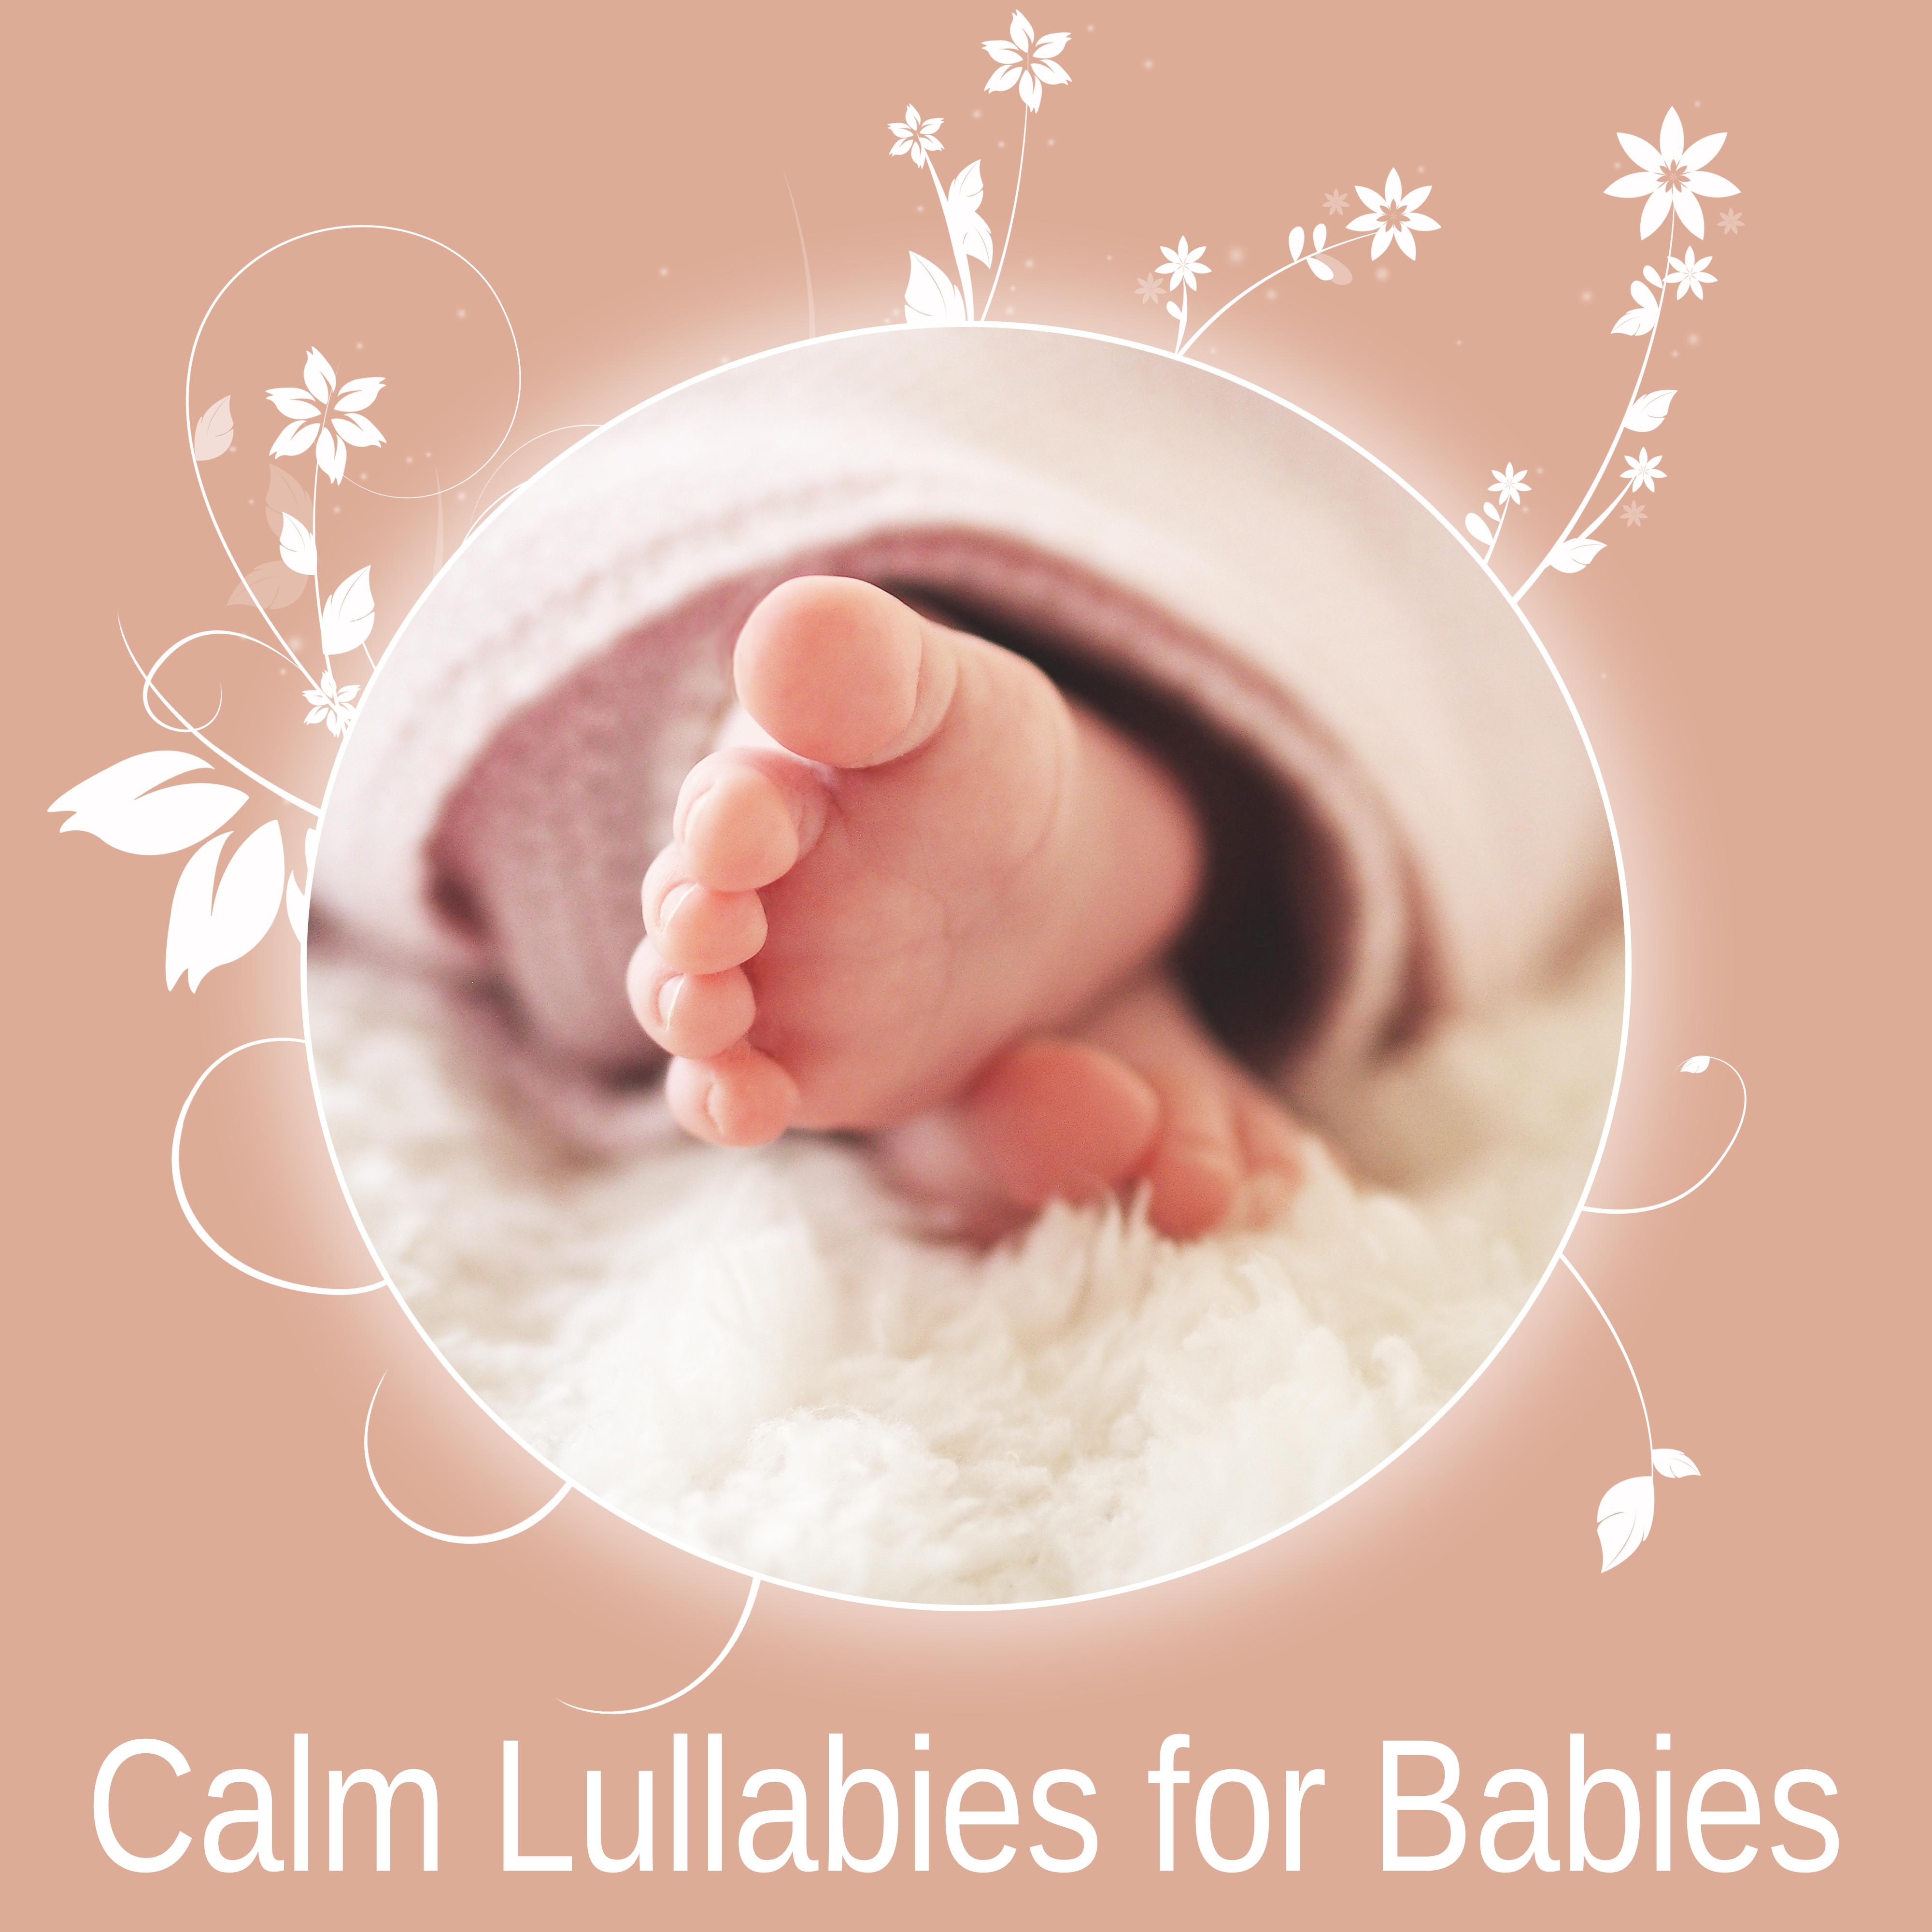 Calm Lullabies for Babies  Soft New Age Music for Baby to Falling Asleep , Relaxing Music, Sleep Music